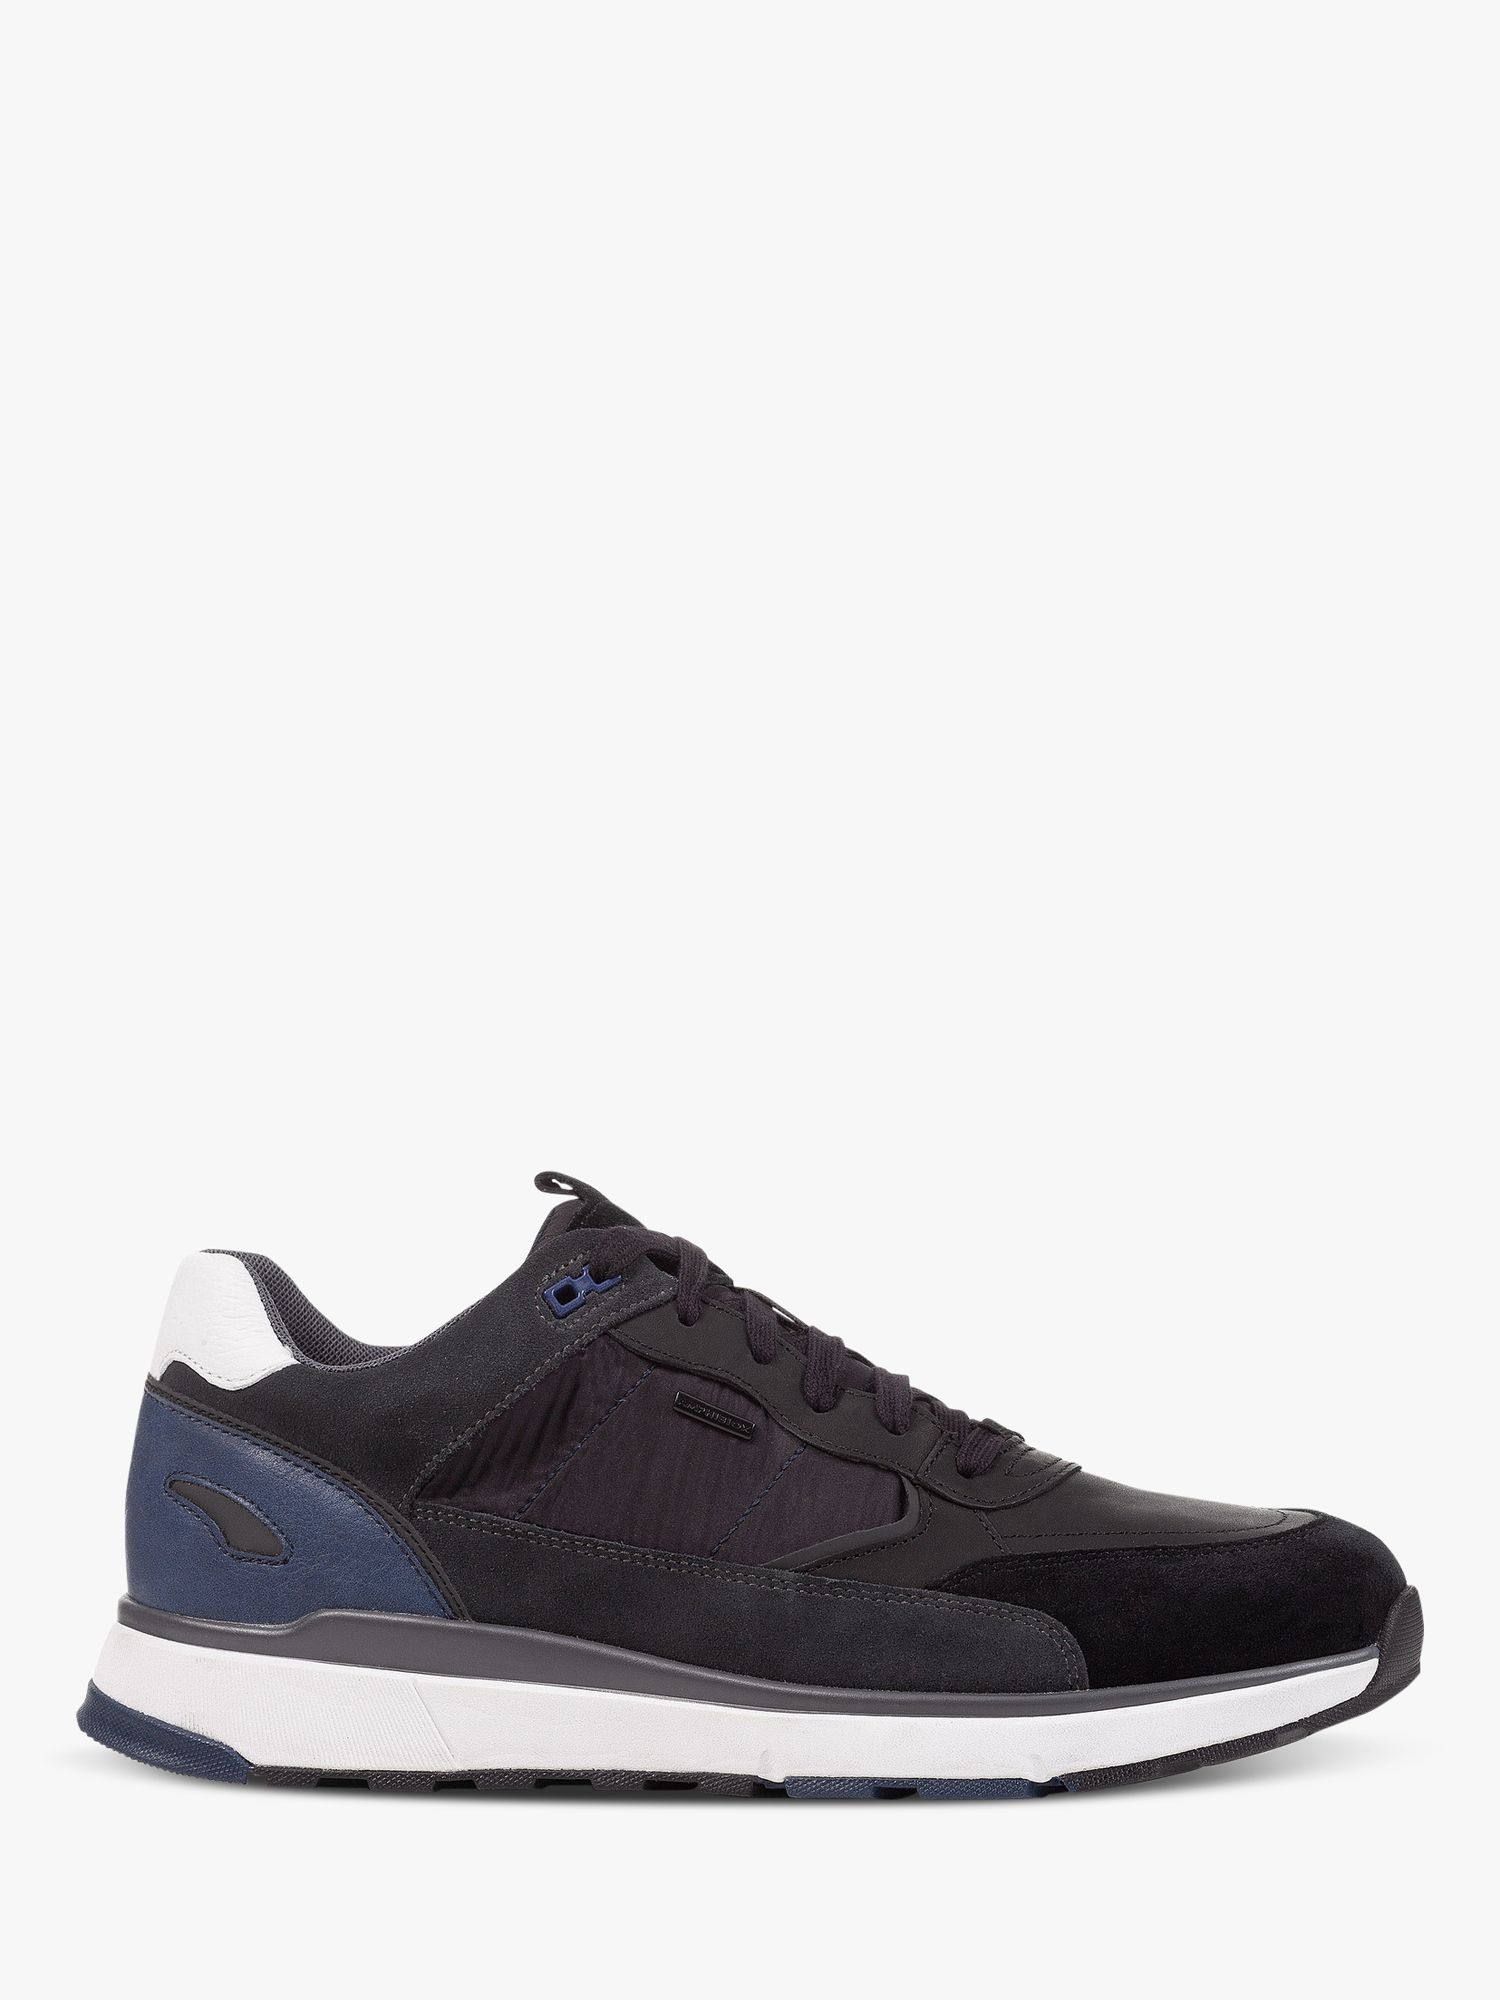 Geox Wide Fit Dolomia ABX Trainers, Black at John Lewis & Partners